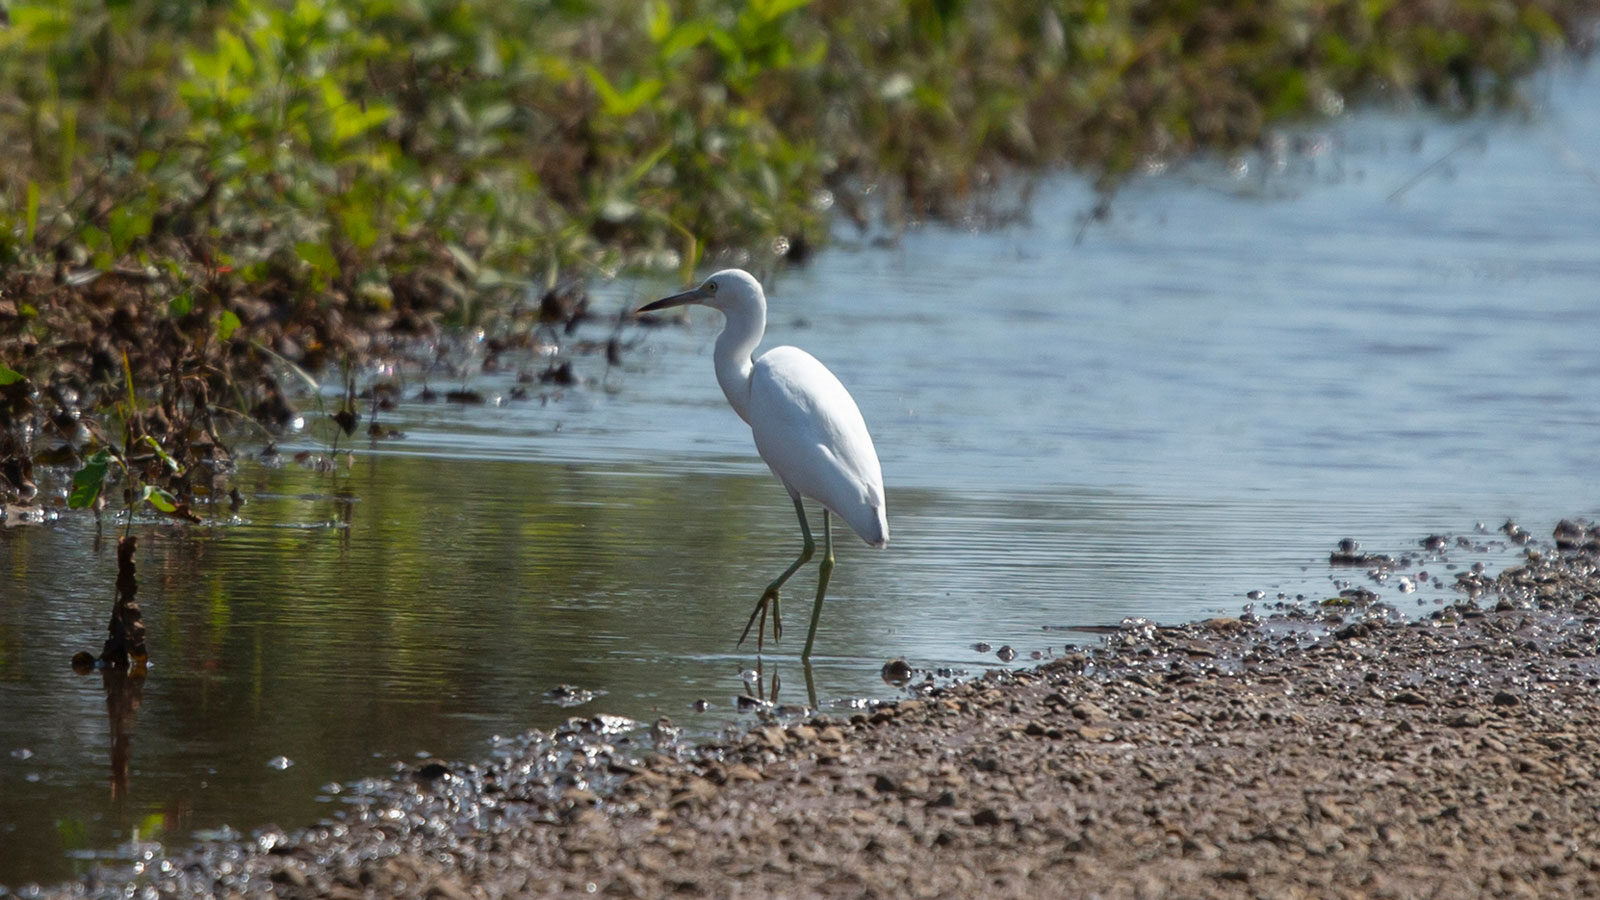 Juvenile little blue heron wading in shallow ditch water to hunt